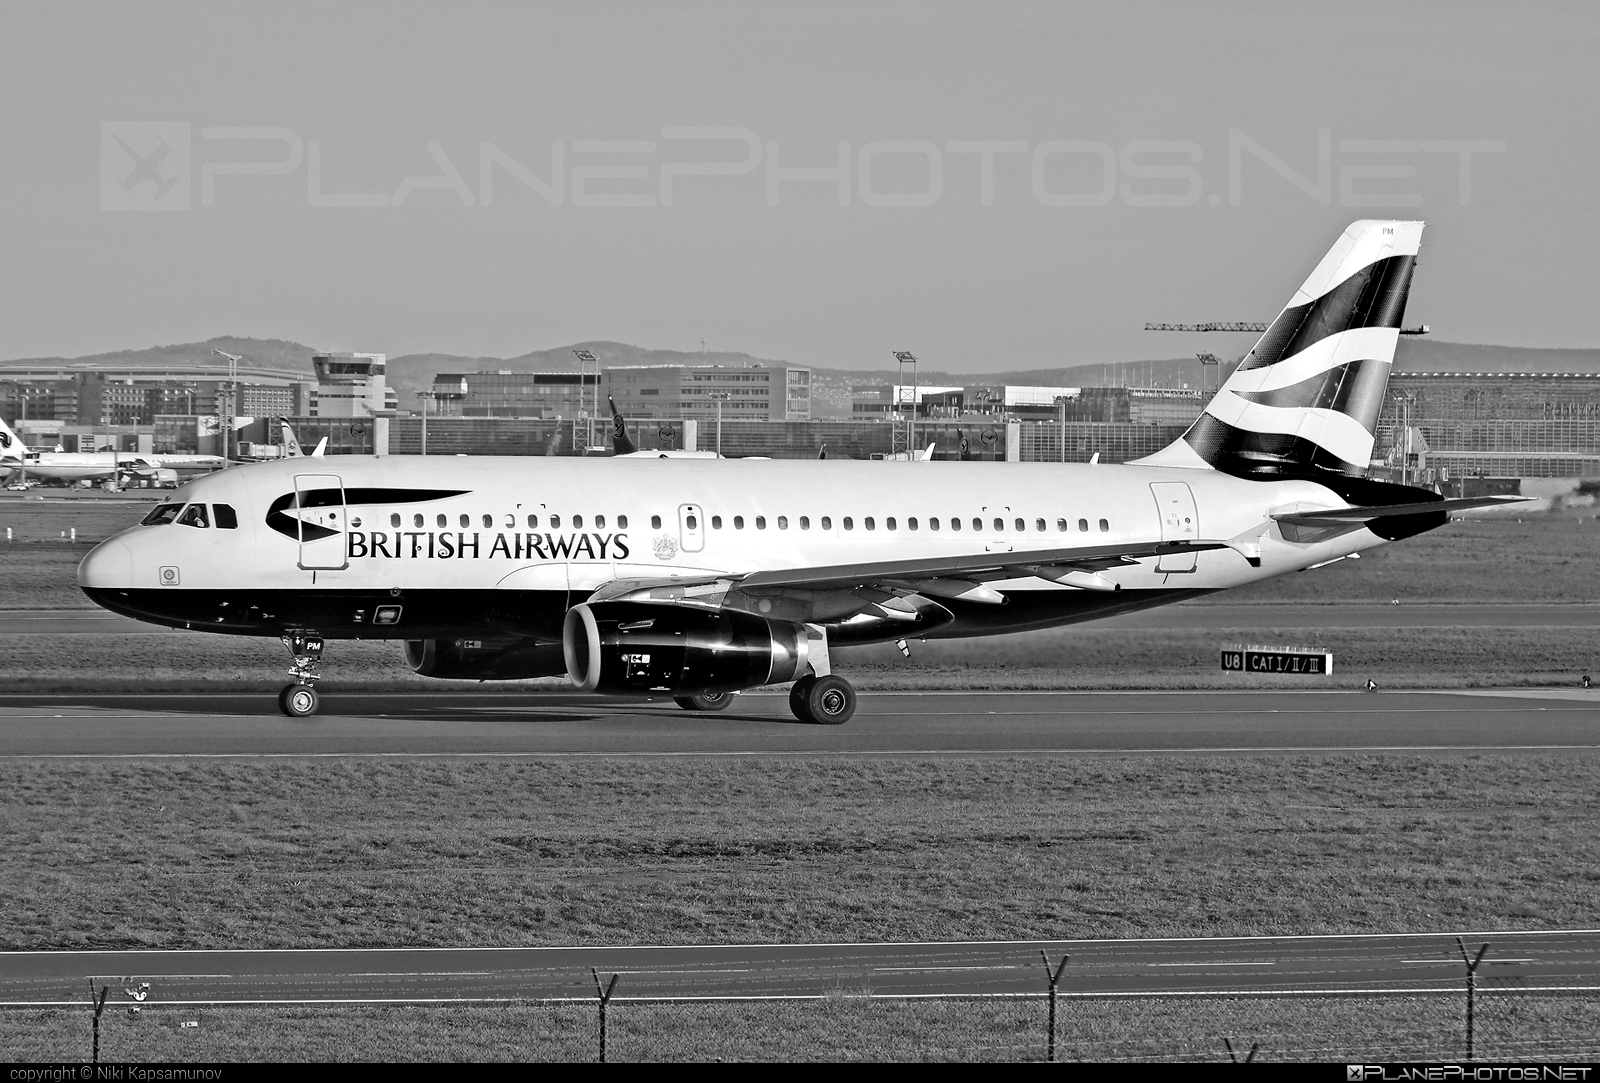 Airbus A319-131 - G-EUPM operated by British Airways #a319 #a320family #airbus #airbus319 #britishairways